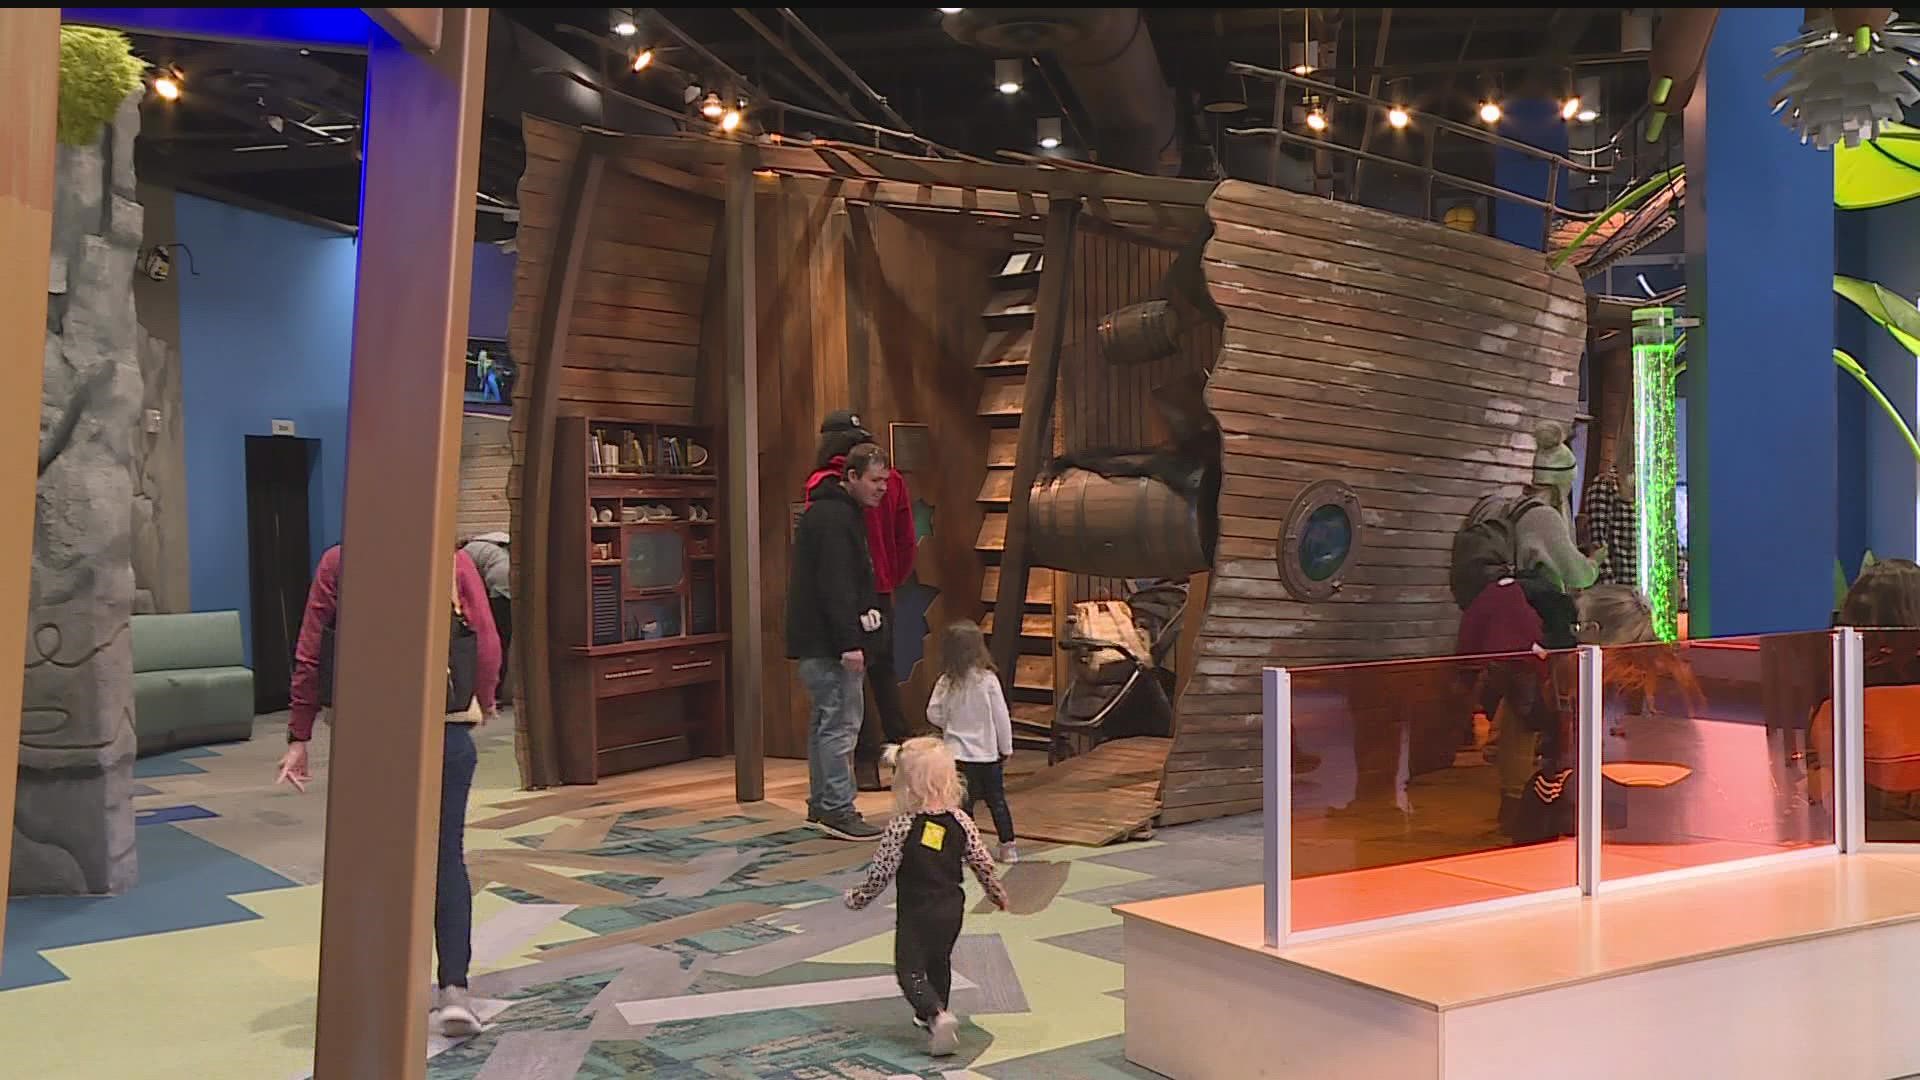 The first new permanent exhibit to open at the Minnesota Children's Museum since 2017 is now taking guests on an underwater adventure.